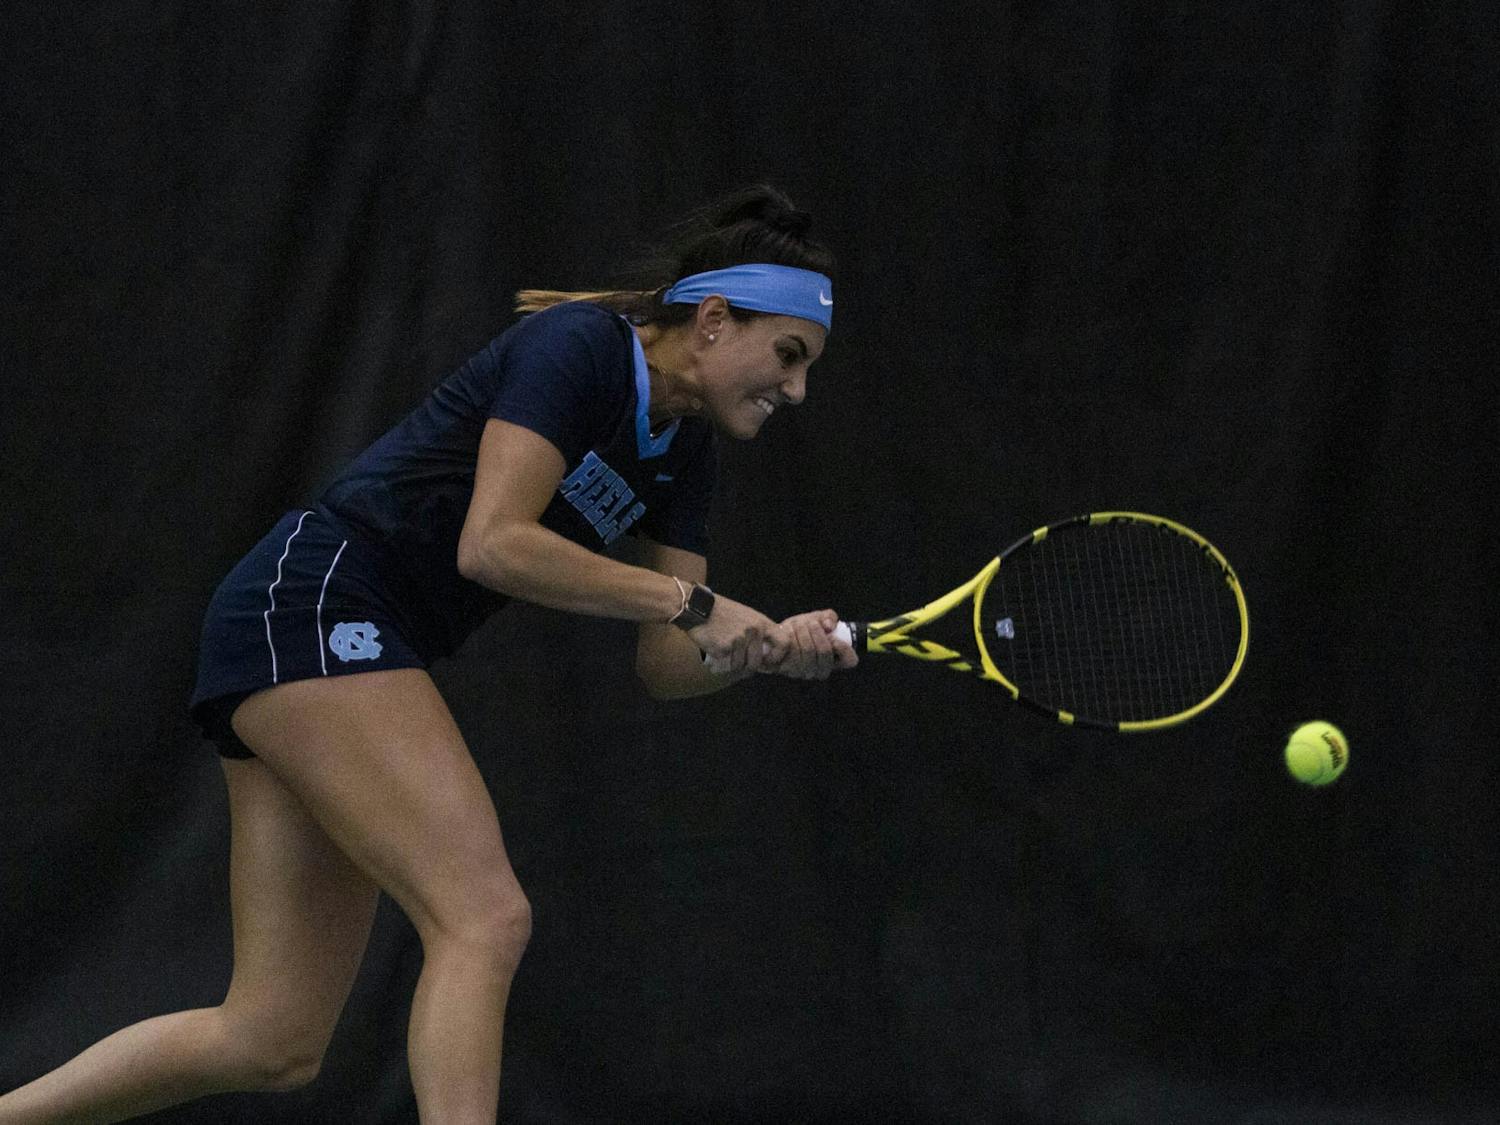 UNC senior Alexa Graham swings at her opponent's serve on Sunday, Feb. 2, 2020. Graham won her first set 6-4, and 6-2 in the second set. UNC beat Vanderbilt 7-0 overall. 